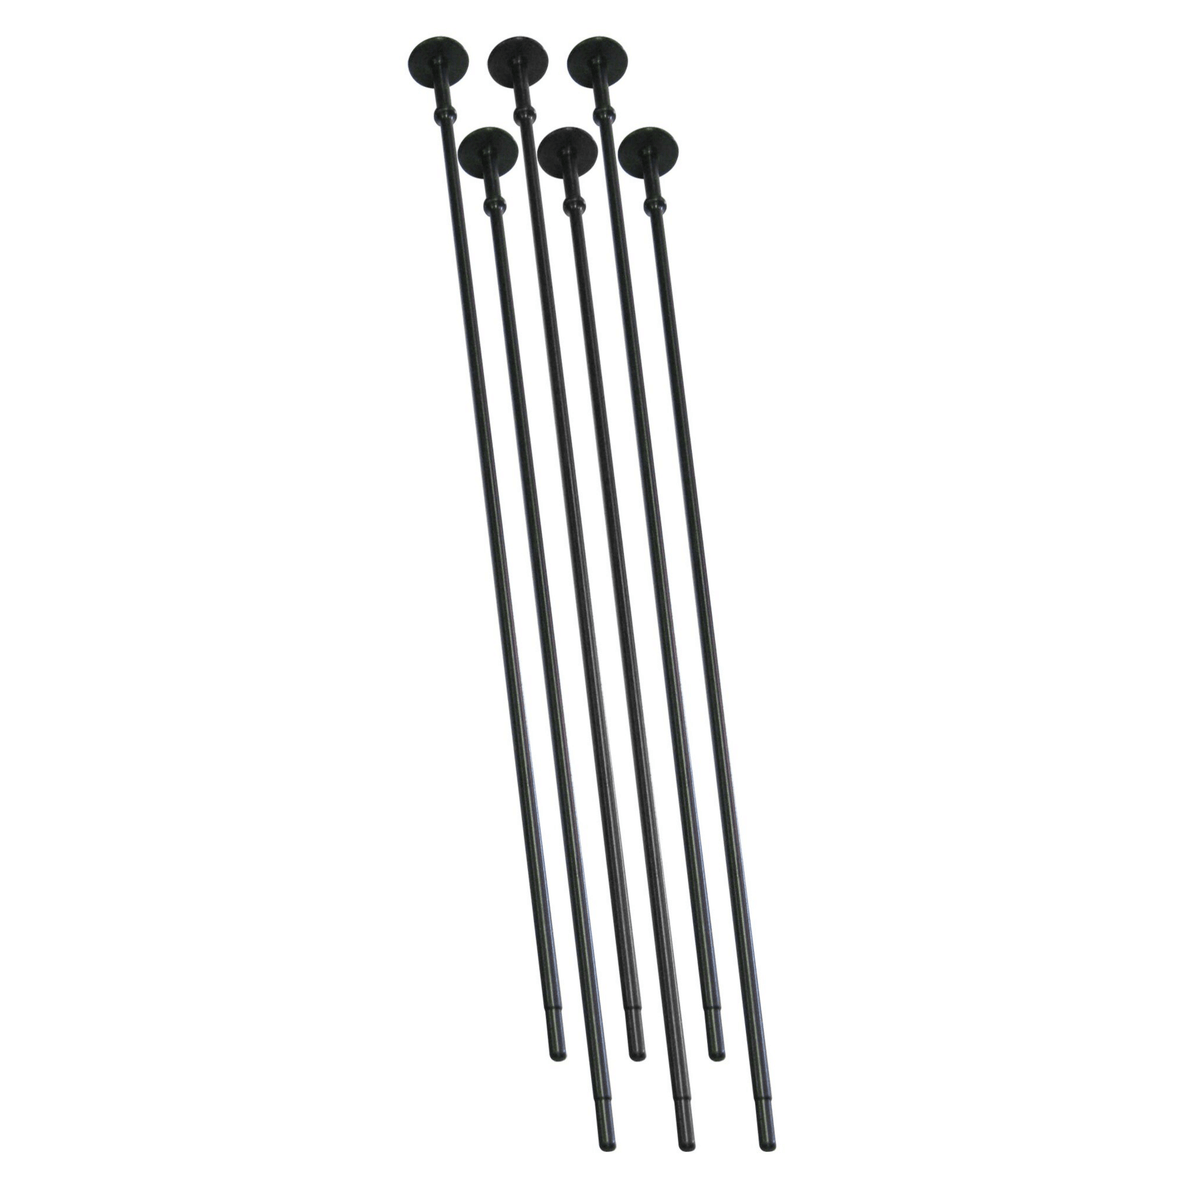  Gun Storage Solutions .17 Caliber Pack of 2 Rifle Rod : Safe  Accessories : Sports & Outdoors